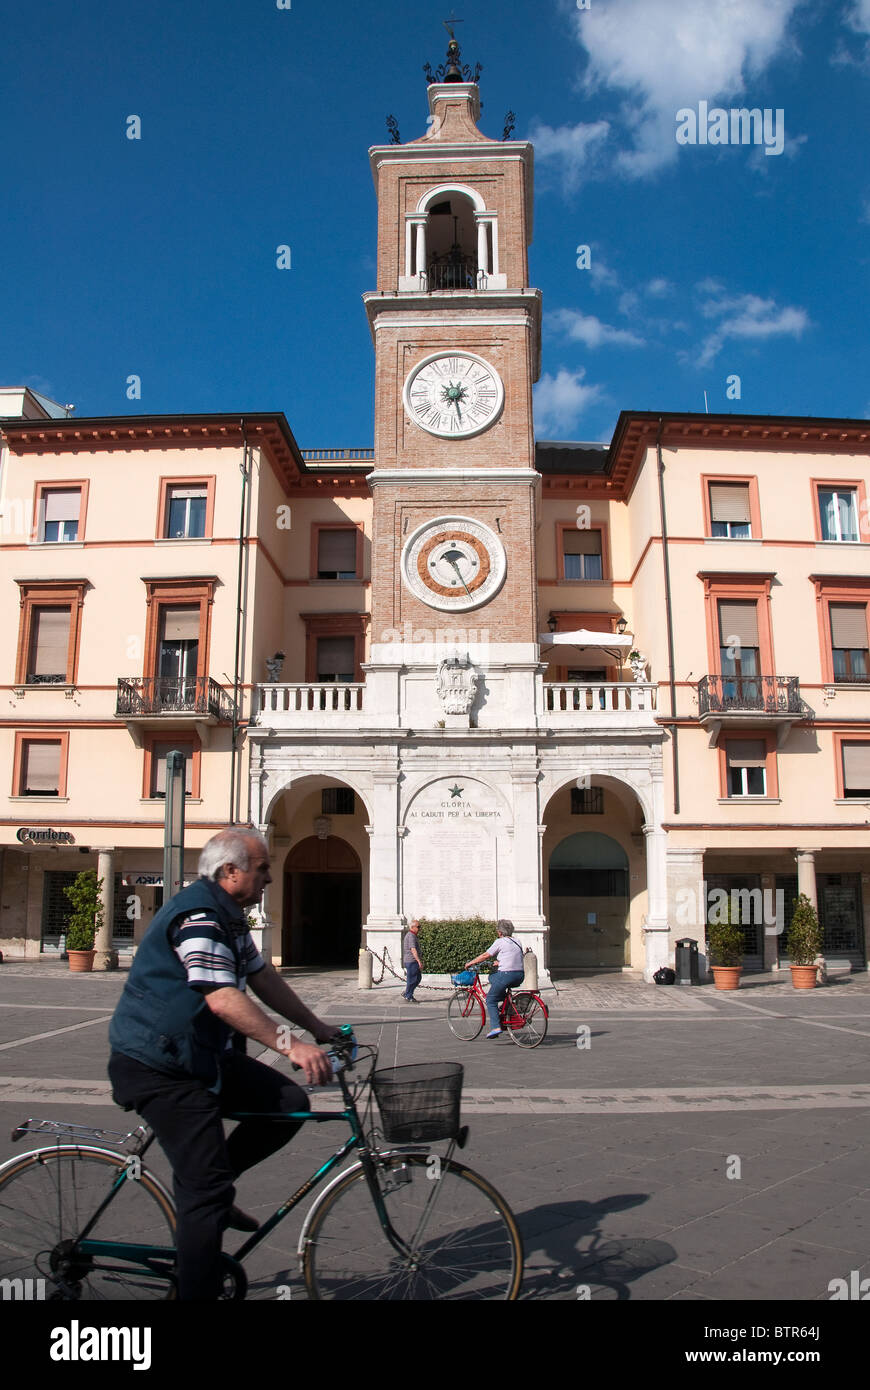 Man cycling past Clock tower telling the time, date and Zodiac sign in Piazza Cavour, Rimini, Emilia Romagna, Italy Stock Photo